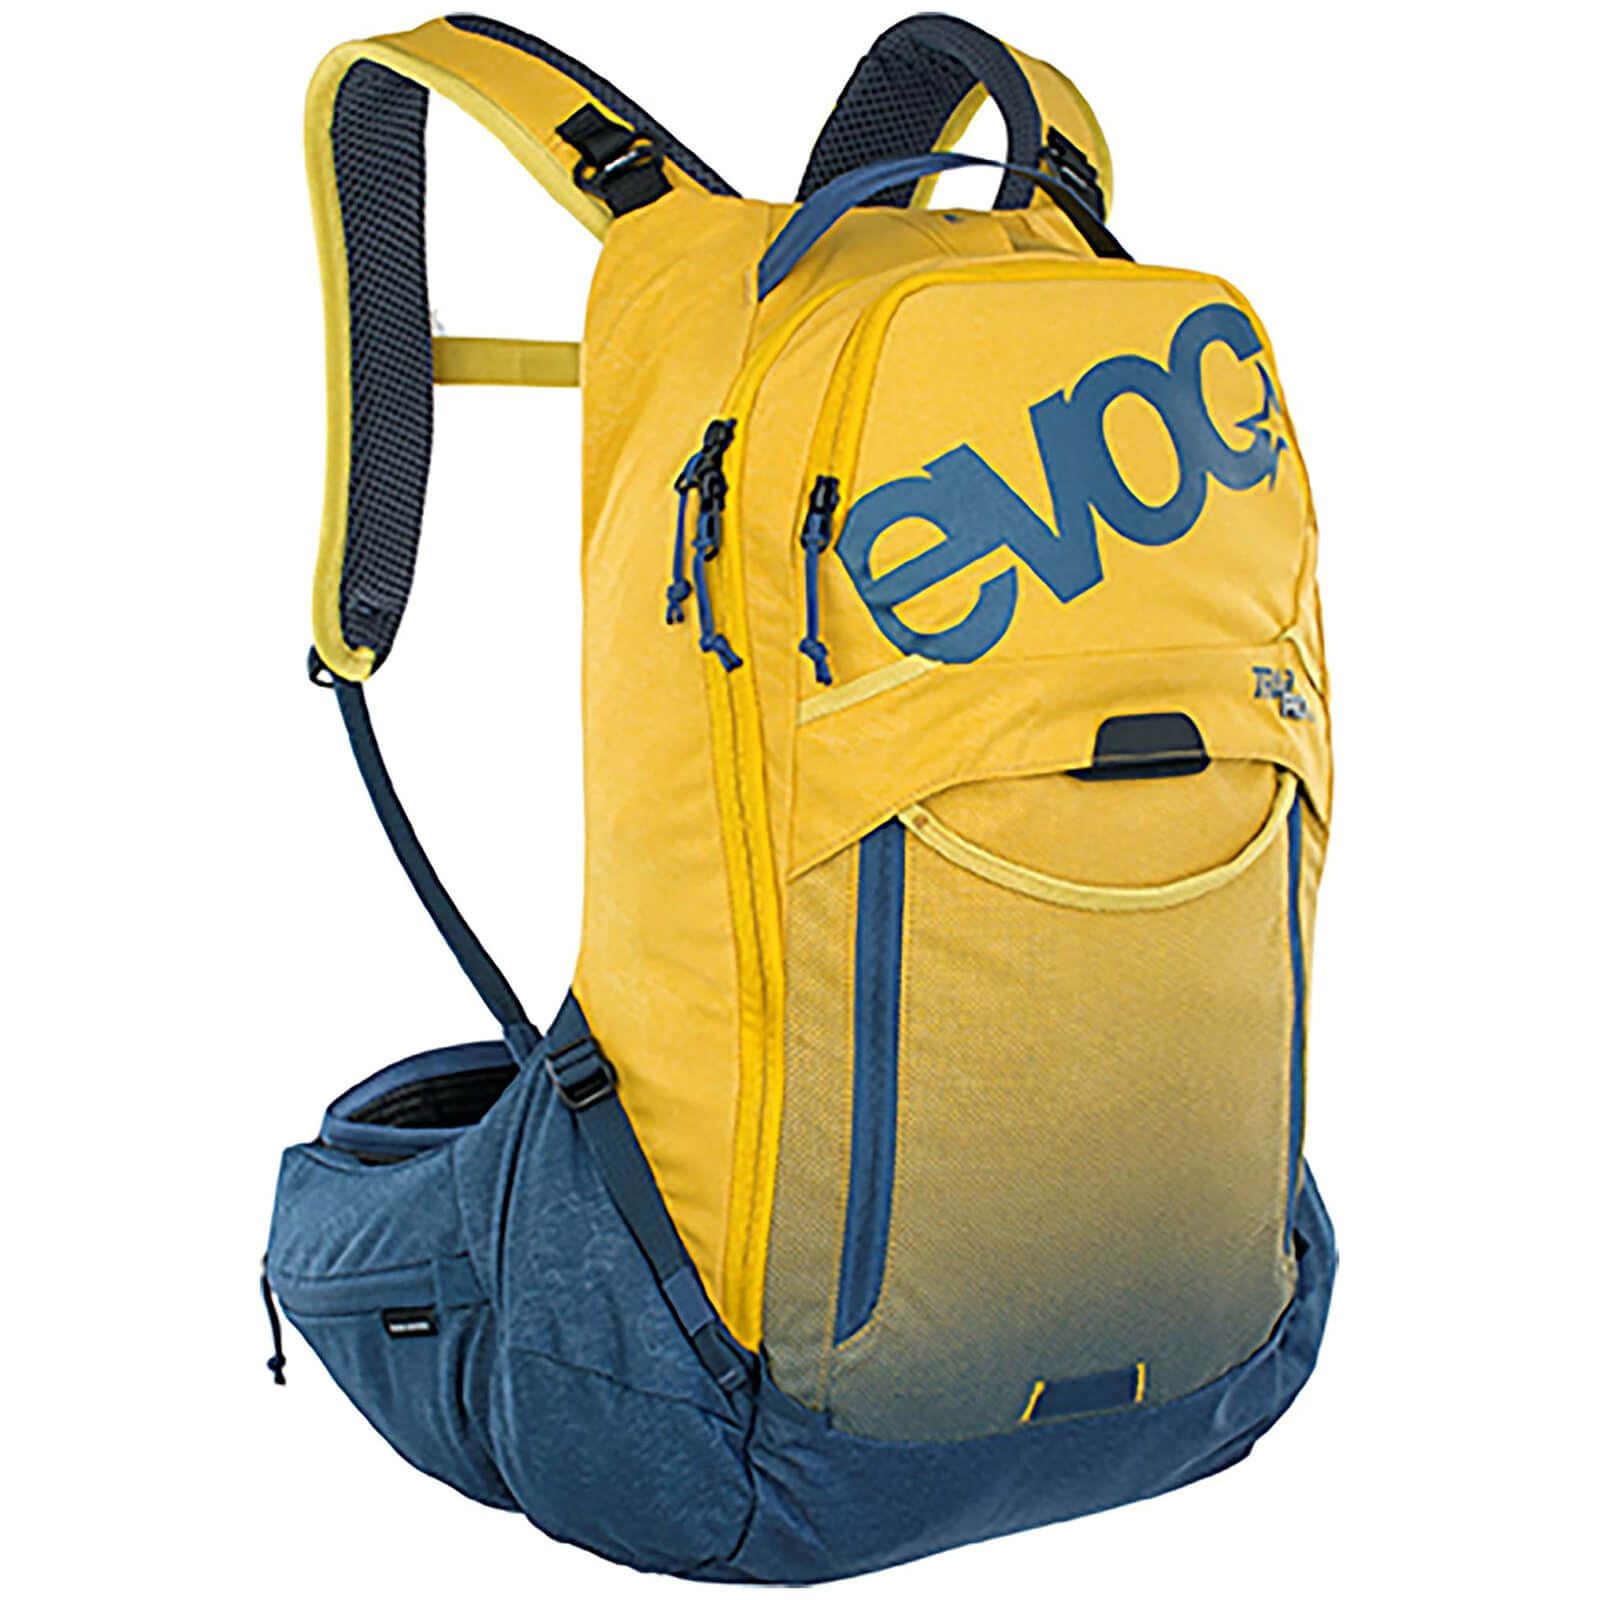 Evoc Trail Pro Protector 16L Backpack - S/M - Curry/Denim